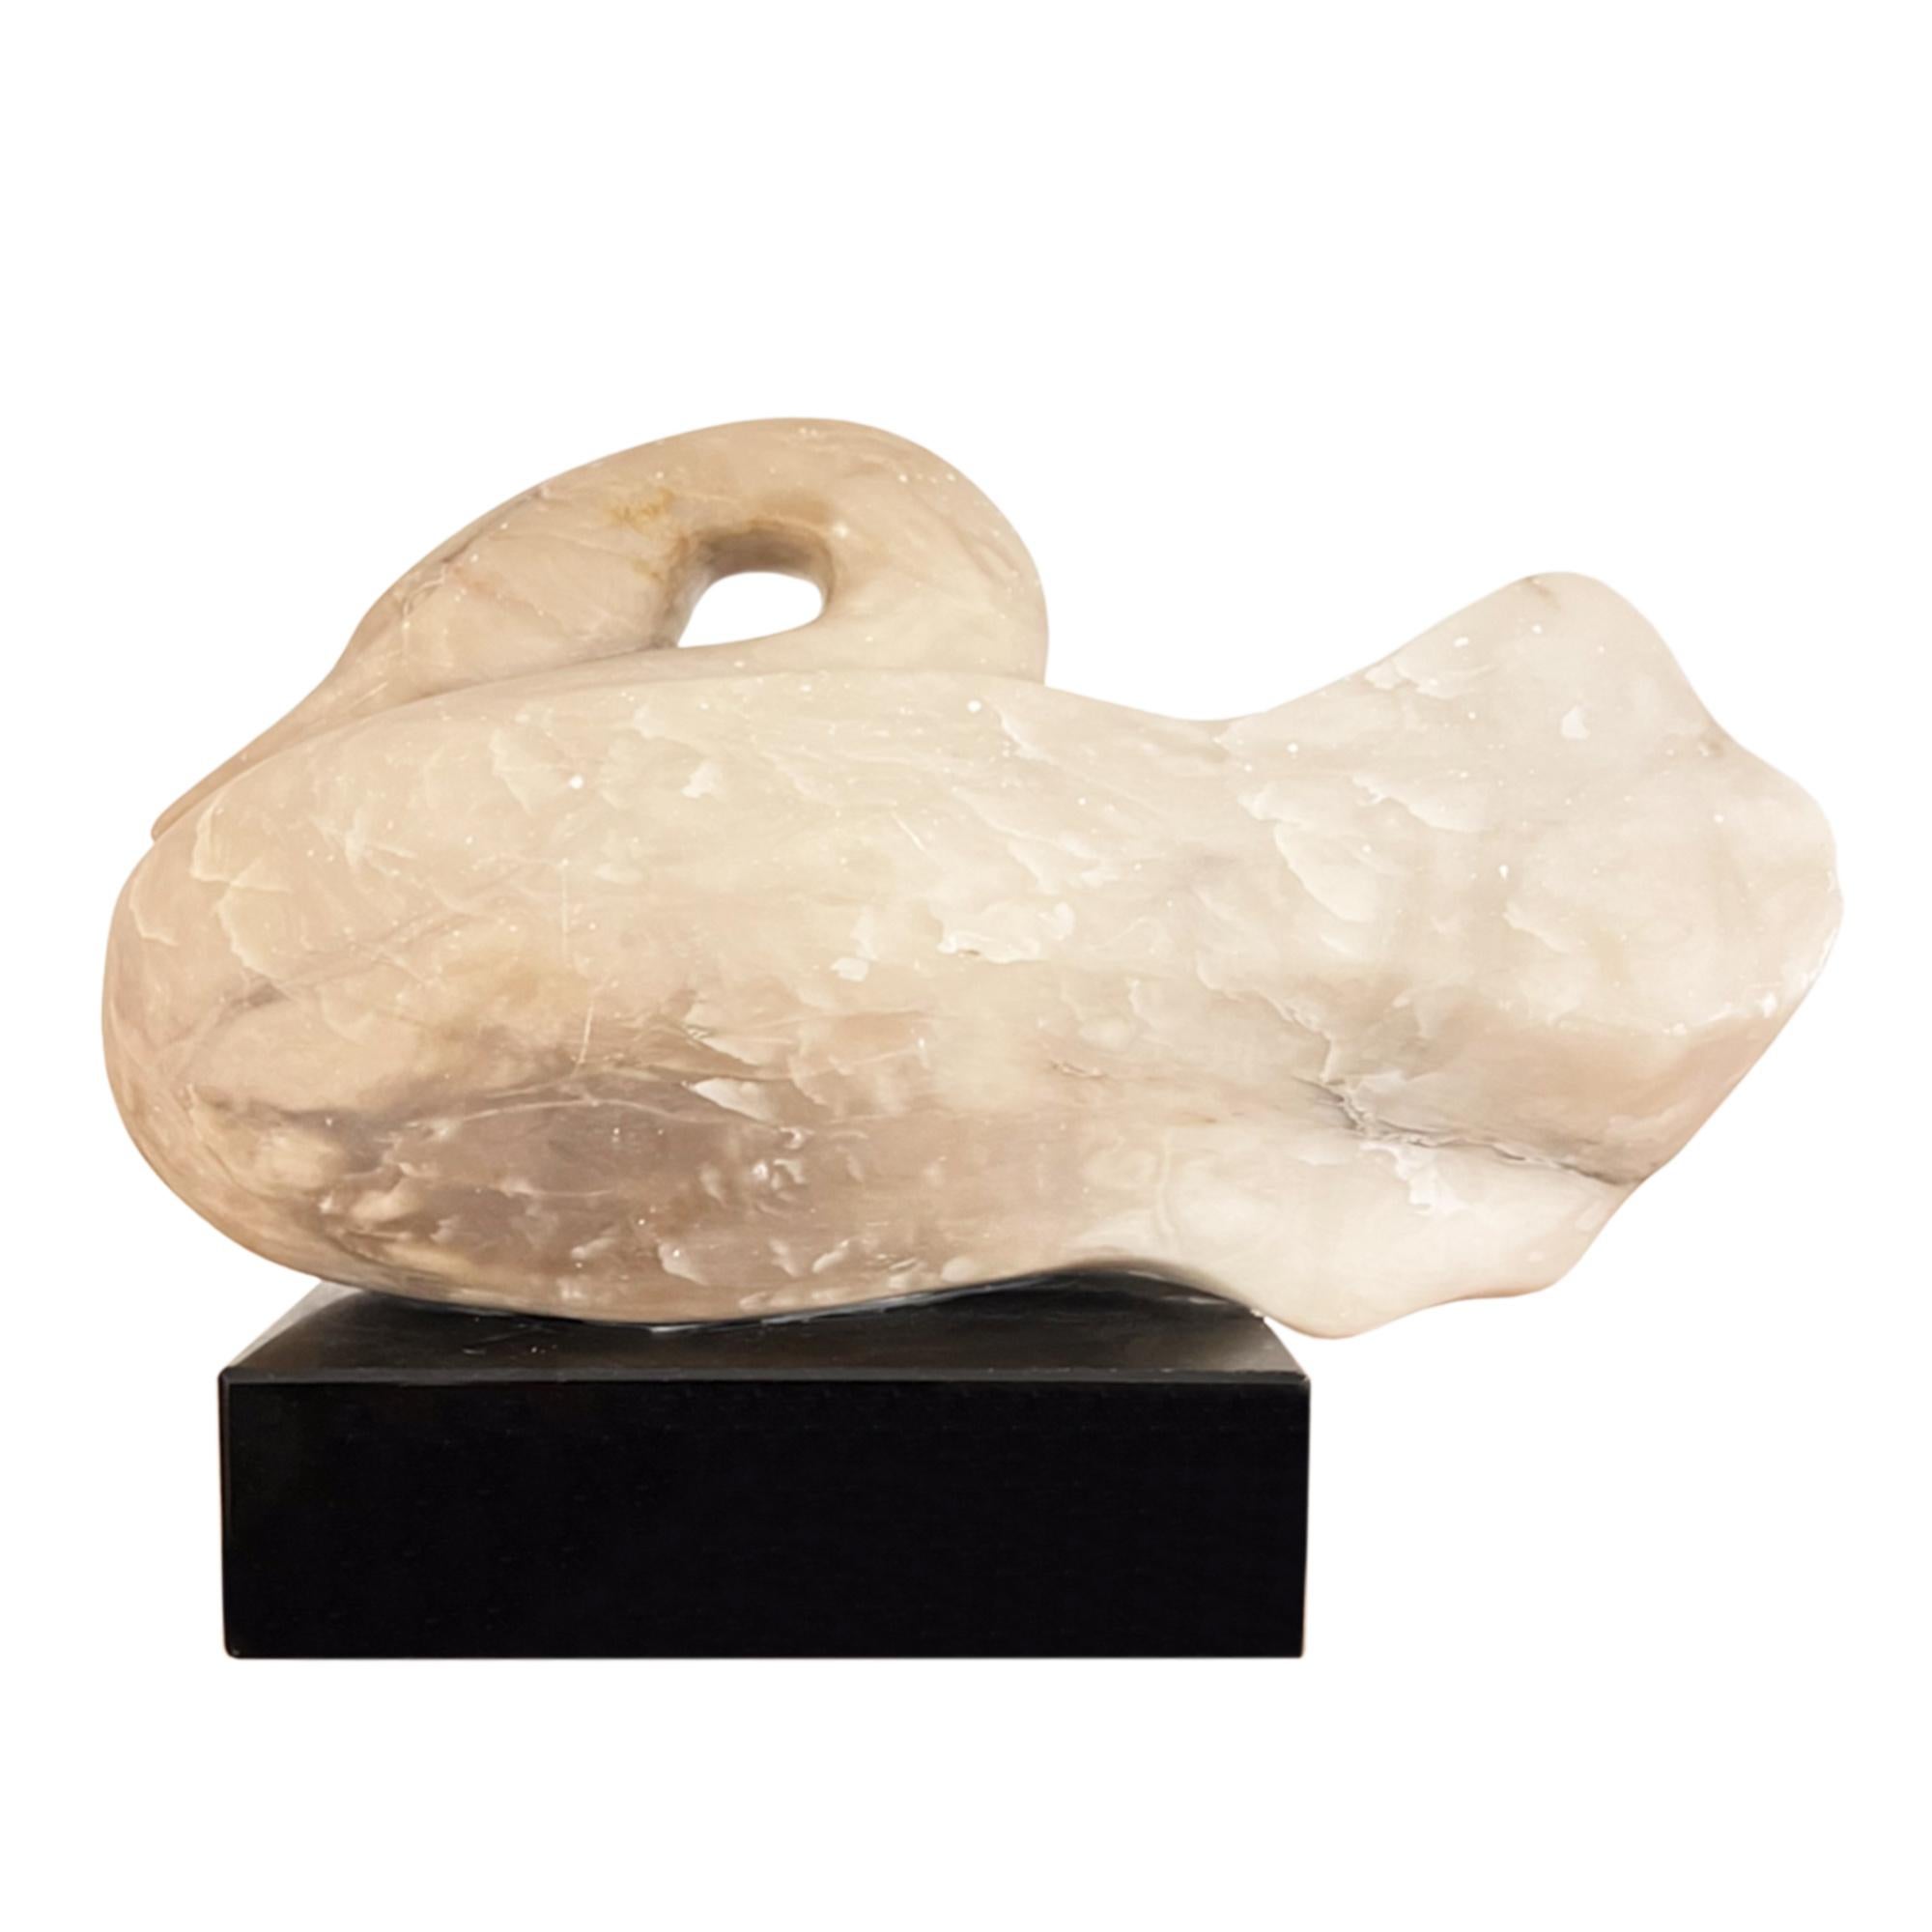 This is a beautiful sculpture of a swan crafted from a rich cream-grey onyx.

Mounted on a black rotating plinth, which allows the detail of the bird to be fully appreciated. 

A classic pose - so graceful and tactile.

The sculptor was Ralph Hurst